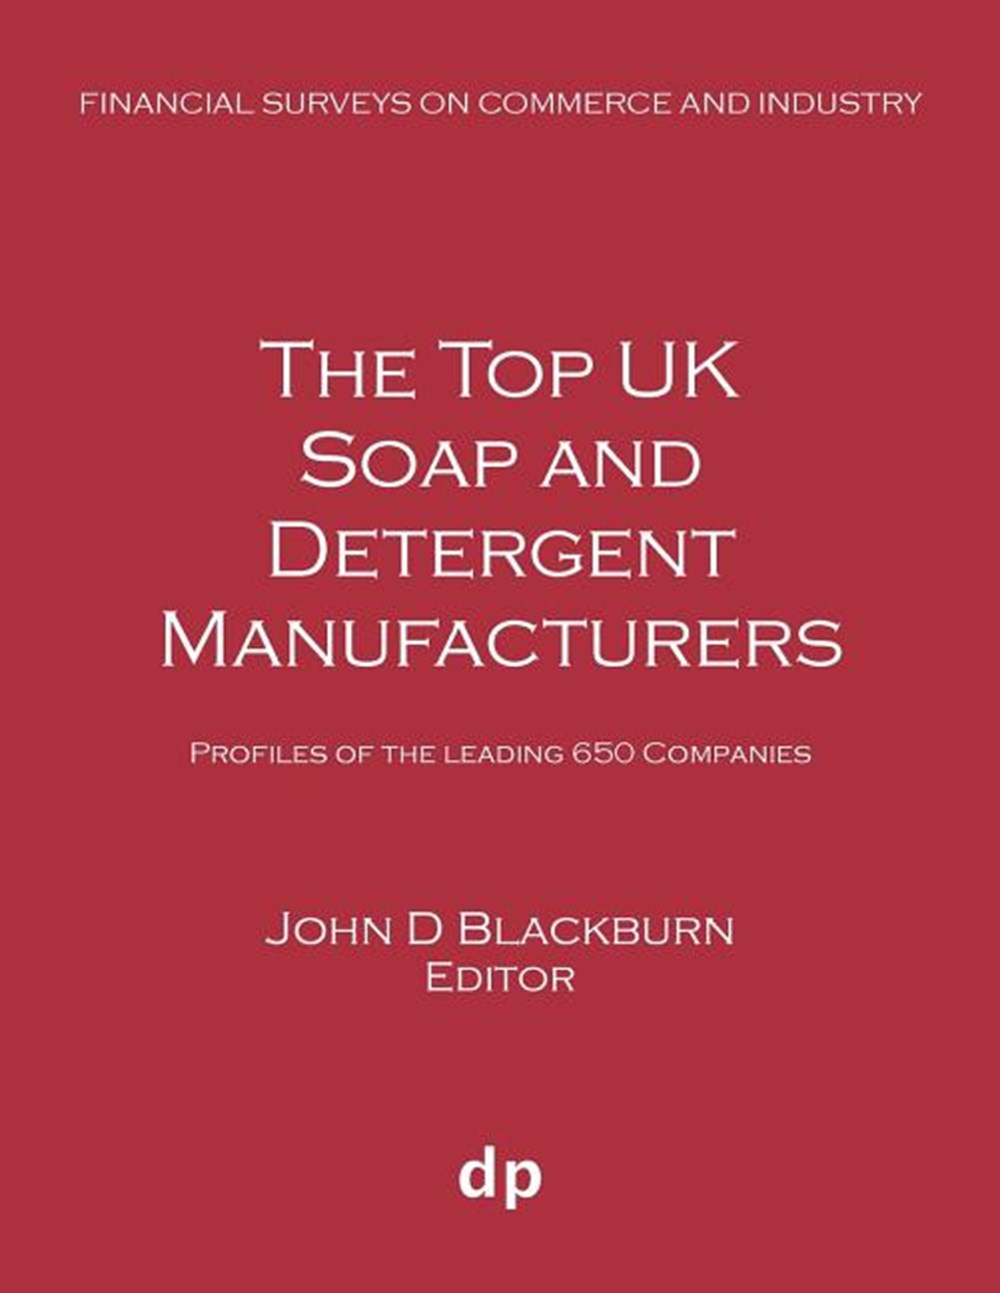 Top UK Soap and Detergent Manufacturers: Profiles of the leading 650 companies (Summer 2019)